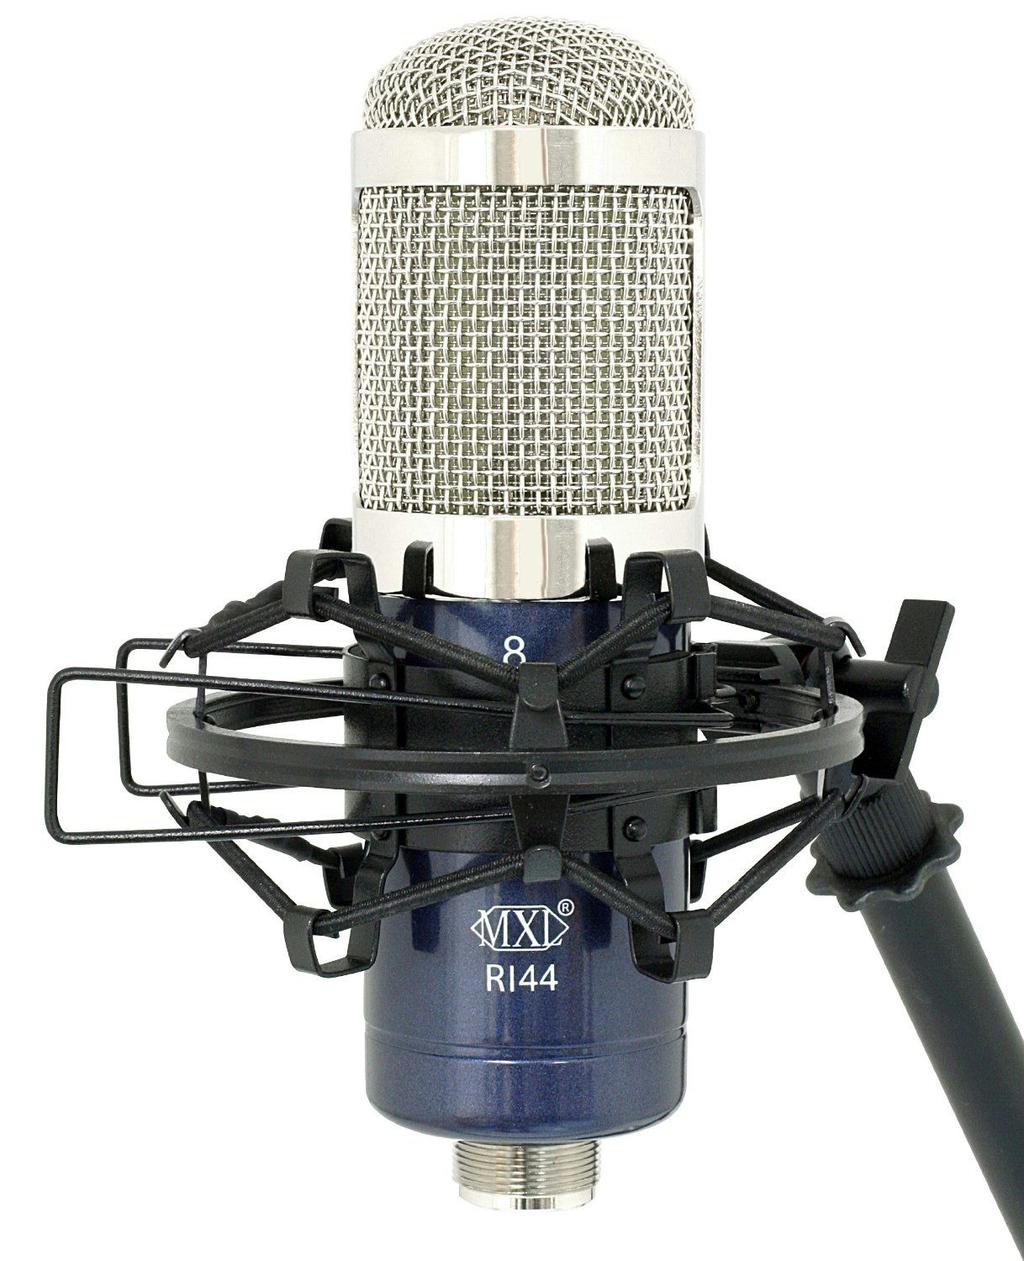 Sennheiser MD 441 U Price :$899.95 Great for : Vocals, general recording Overview: If you want top of the line, and have a good chunk of change to spare then this is the dynamic mic you should go for.